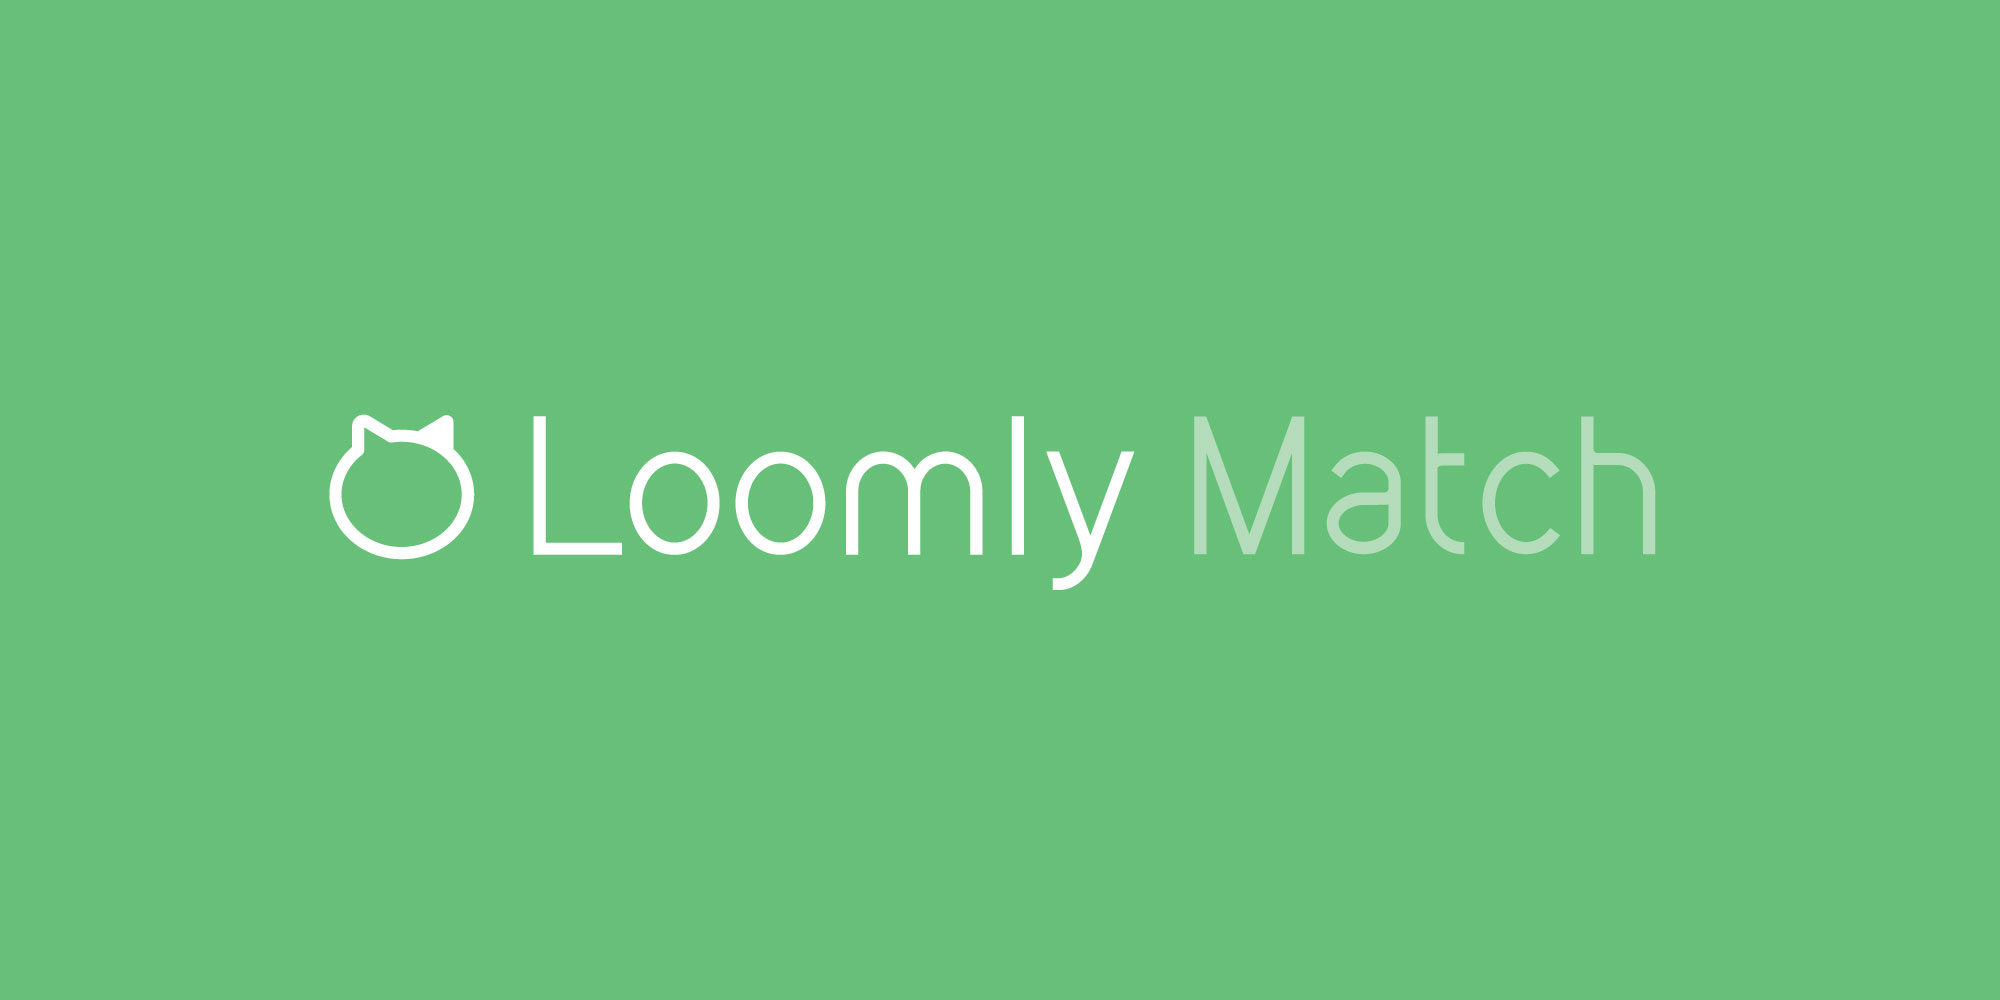 Introducing Loomly Match